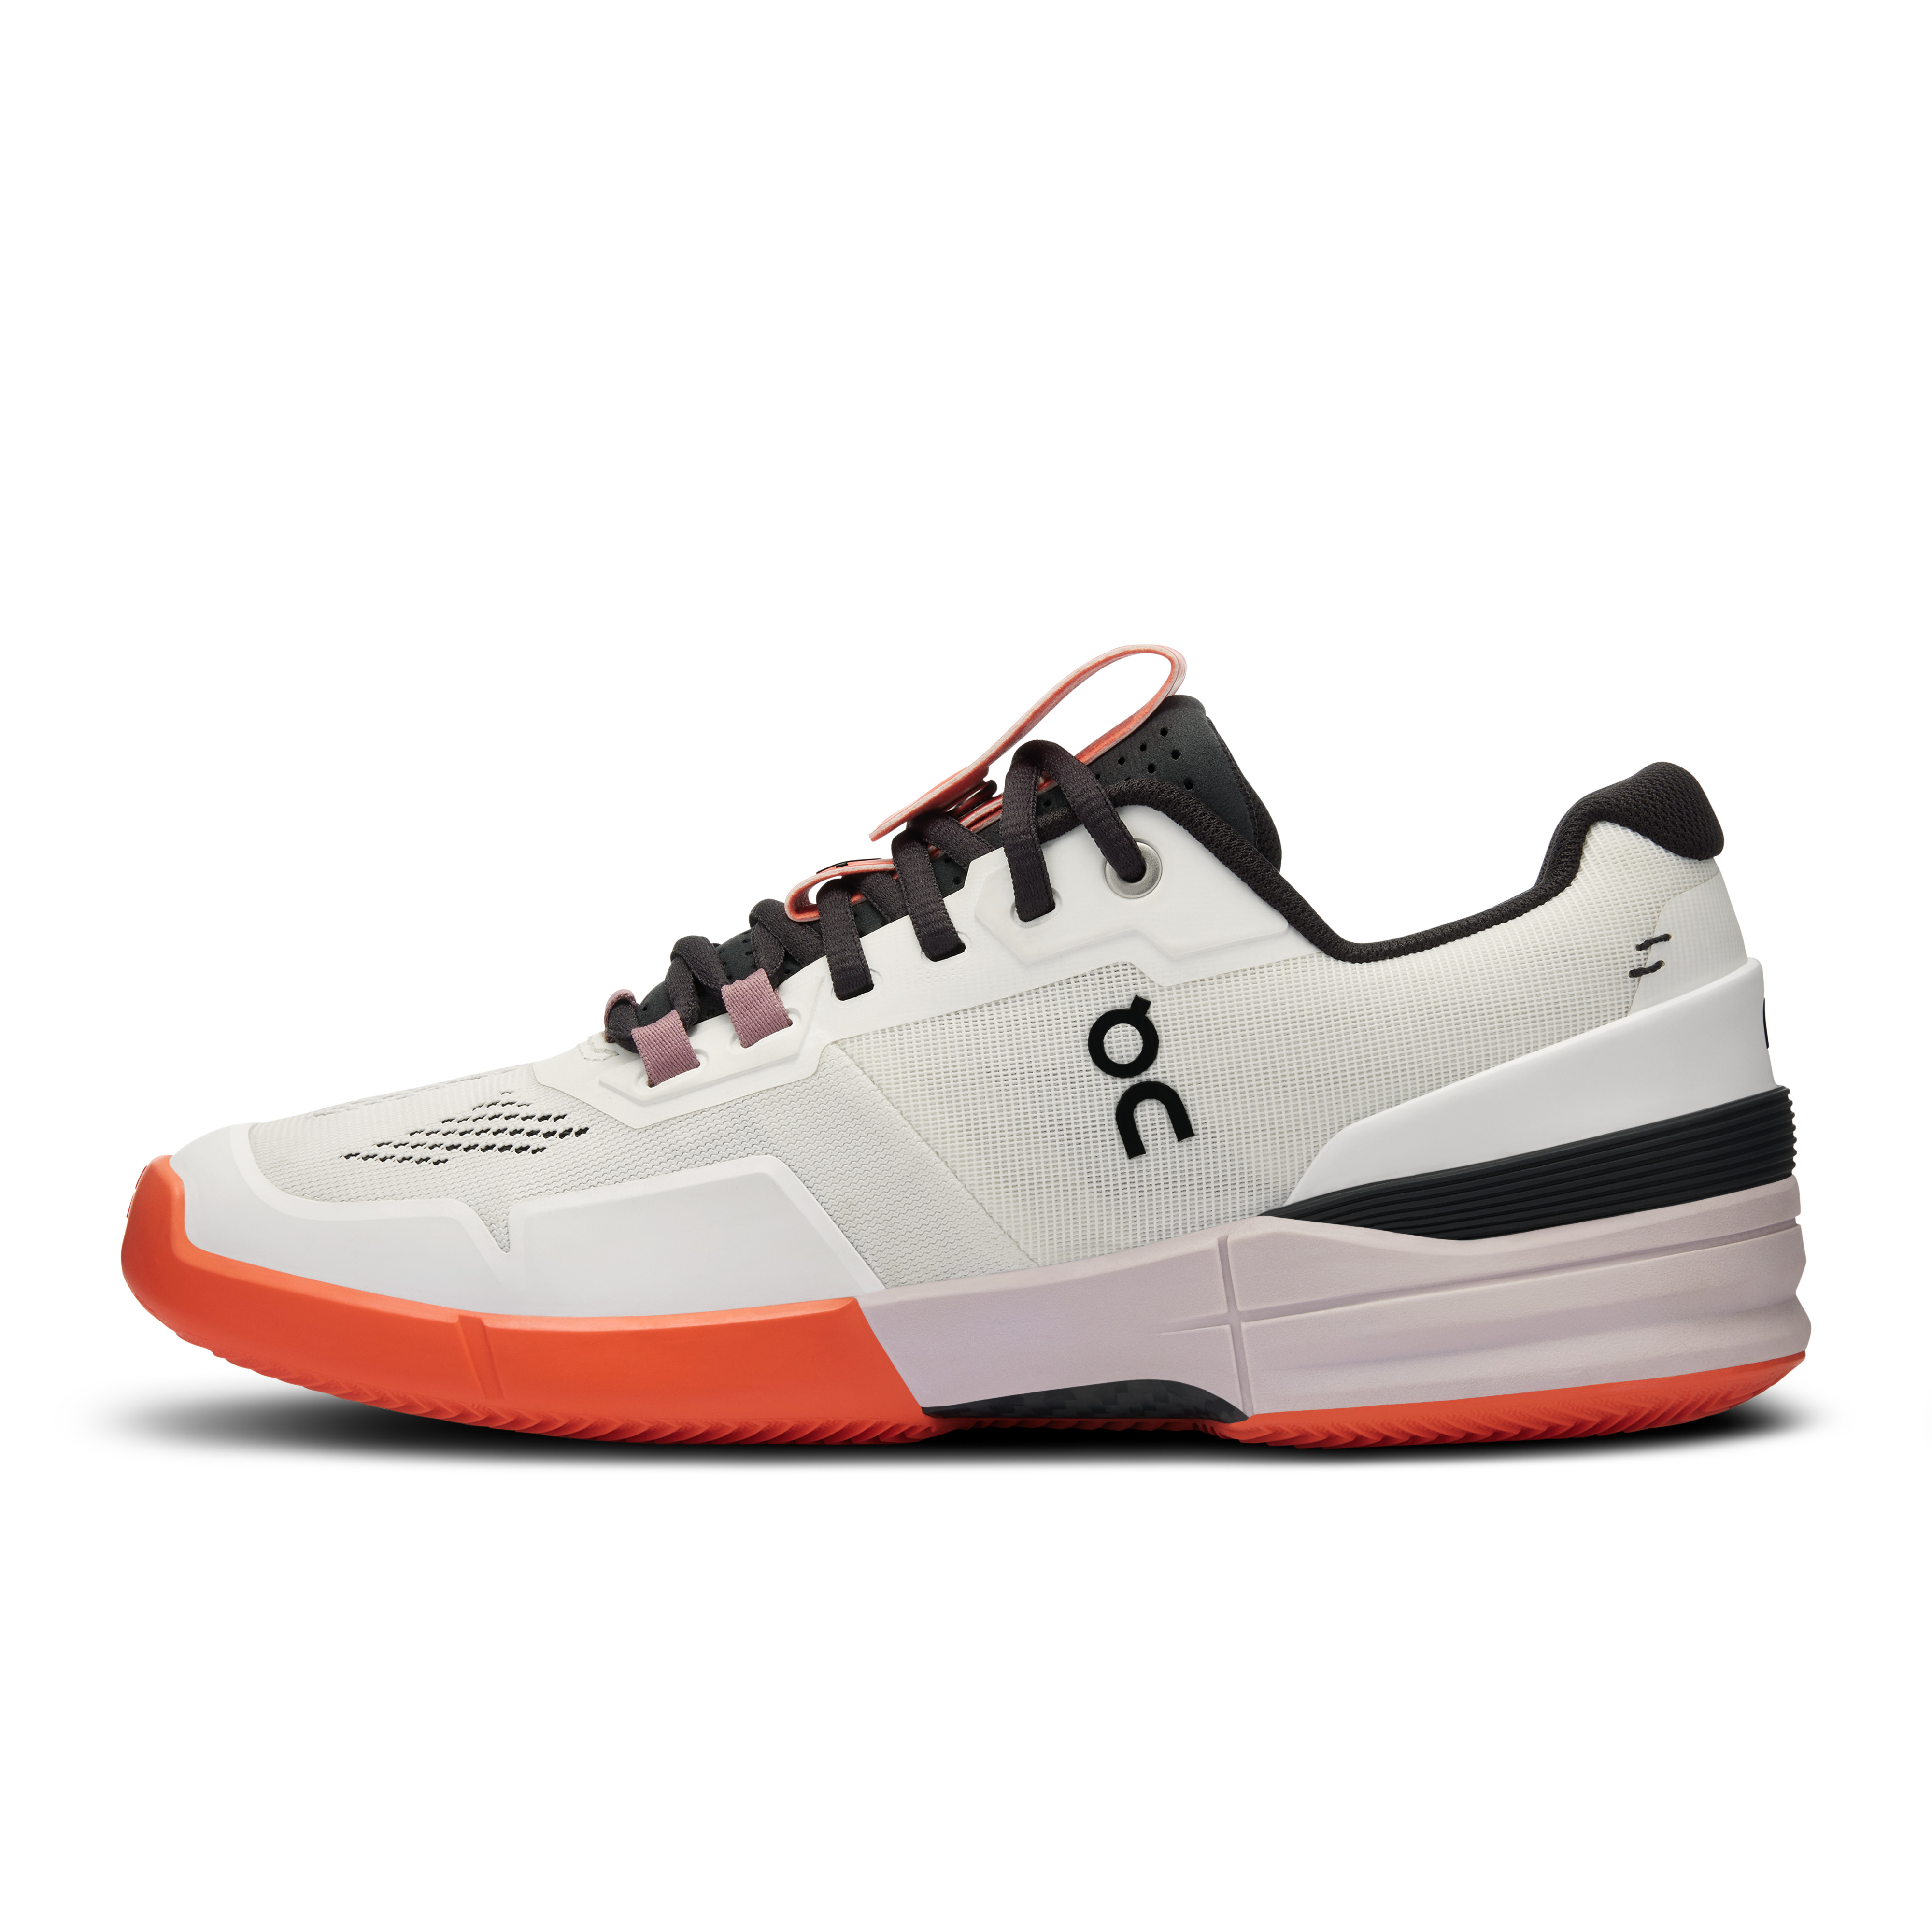 THE ROGER Pro Clay - 4